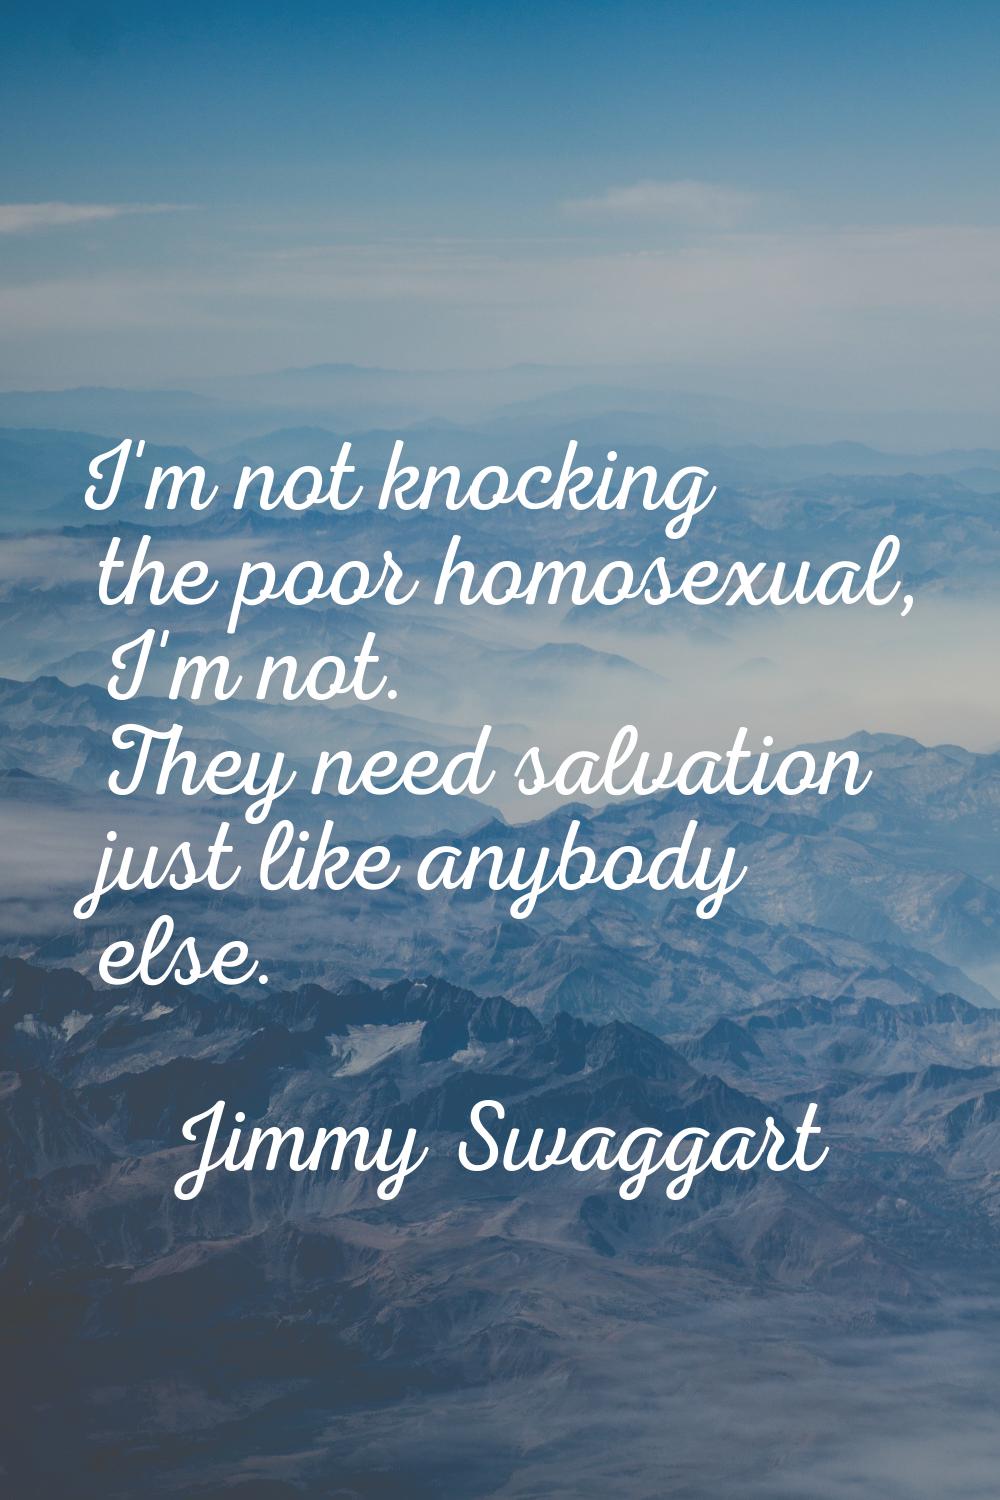 I'm not knocking the poor homosexual, I'm not. They need salvation just like anybody else.